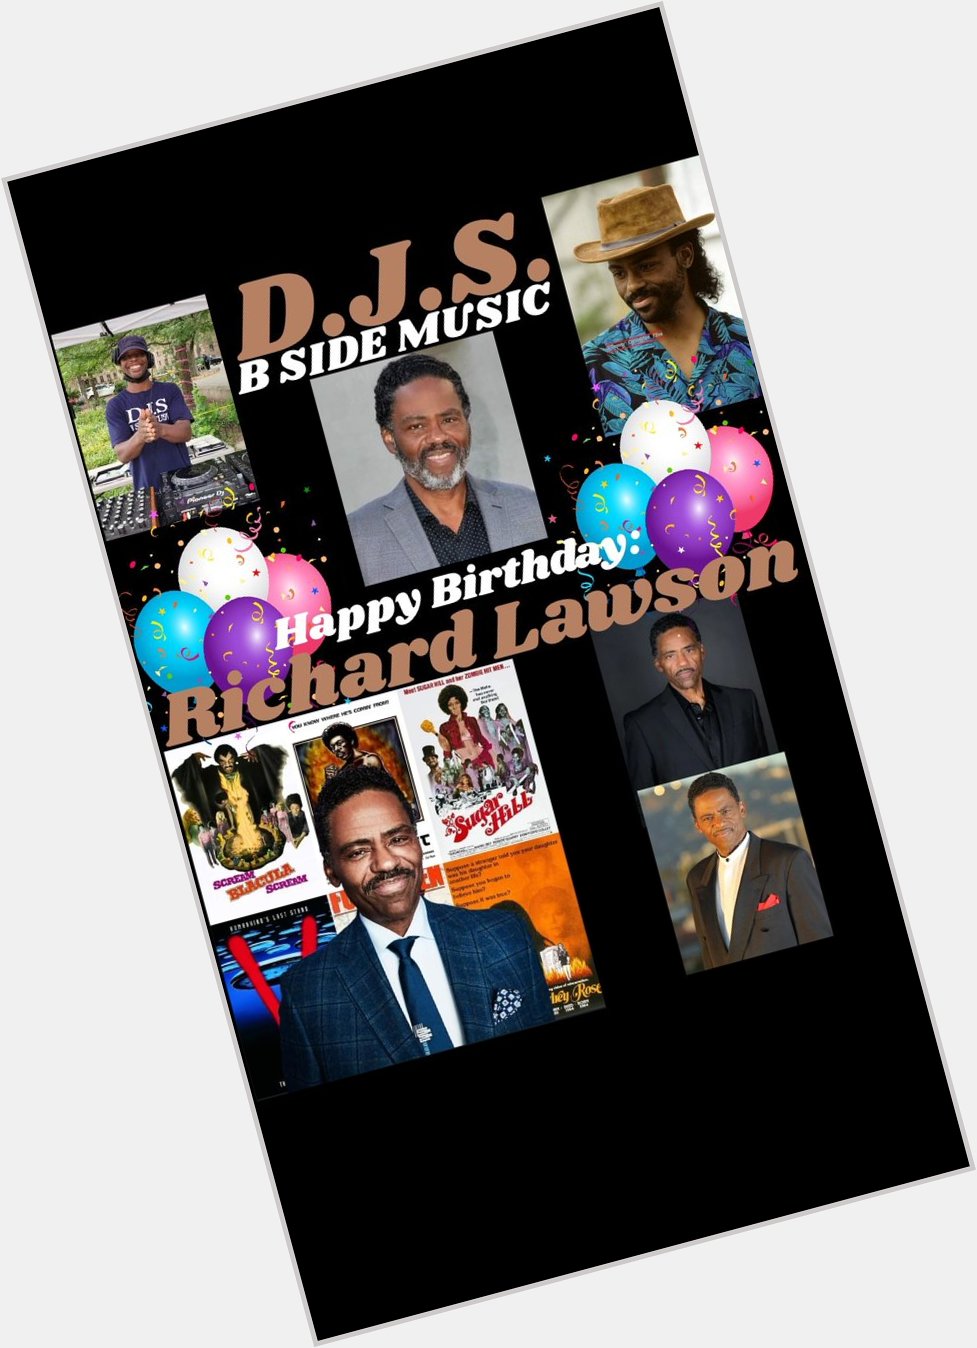 I(D.J.S.)\"B SIDE MUSIC\" saying Happy Birthday to Actor/Television : \"RICHARD LAWSON\"!!! 